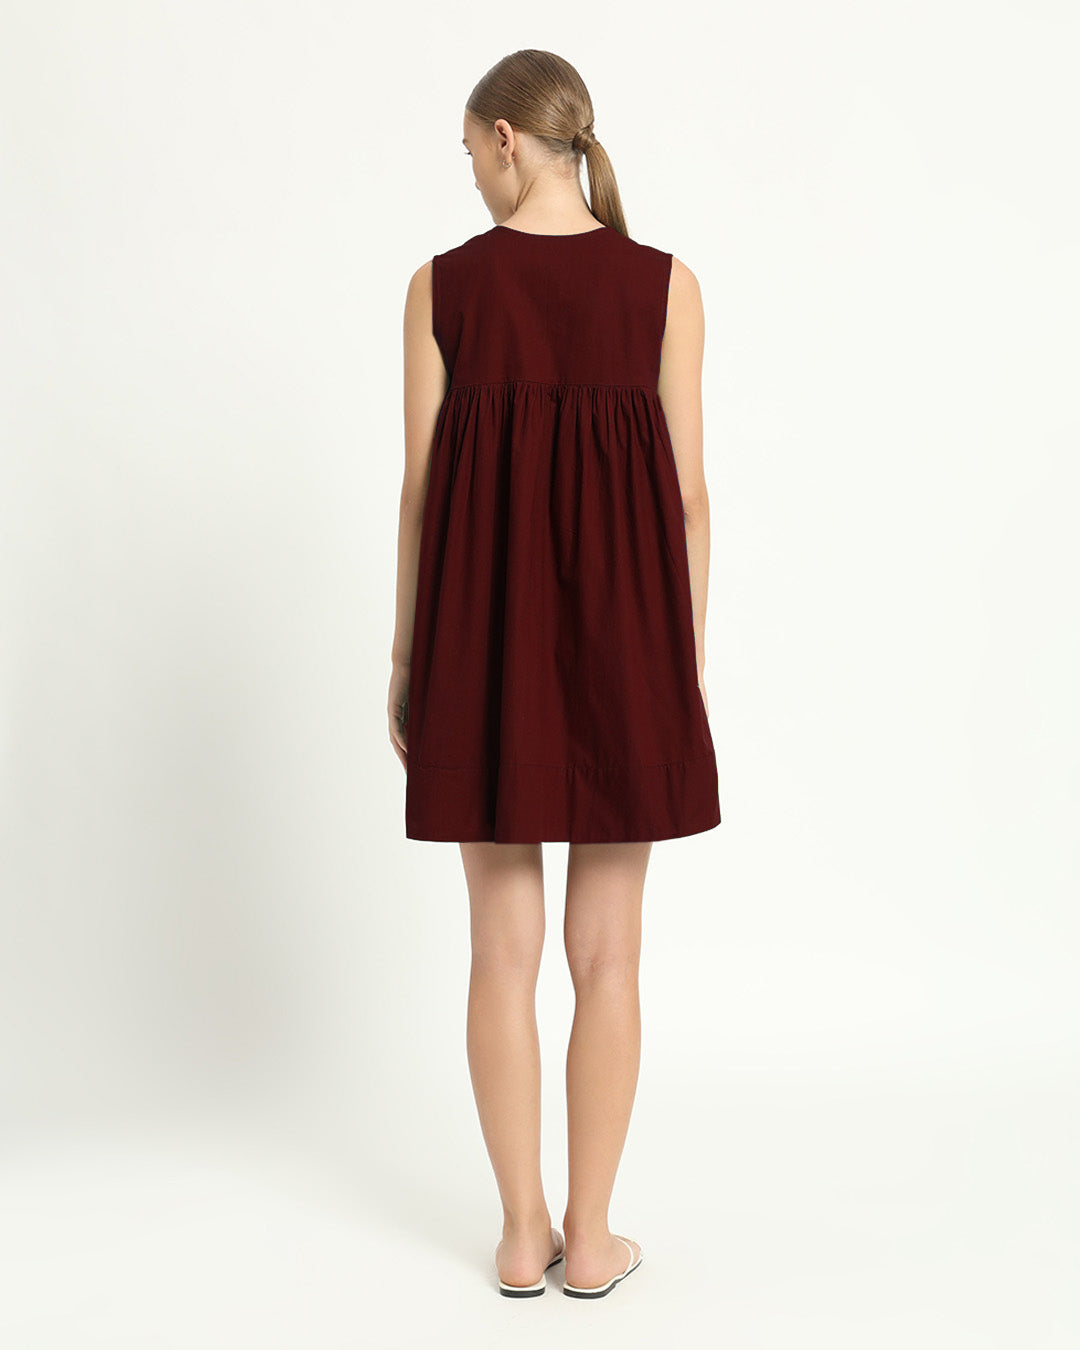 The Jois Rouge Dress